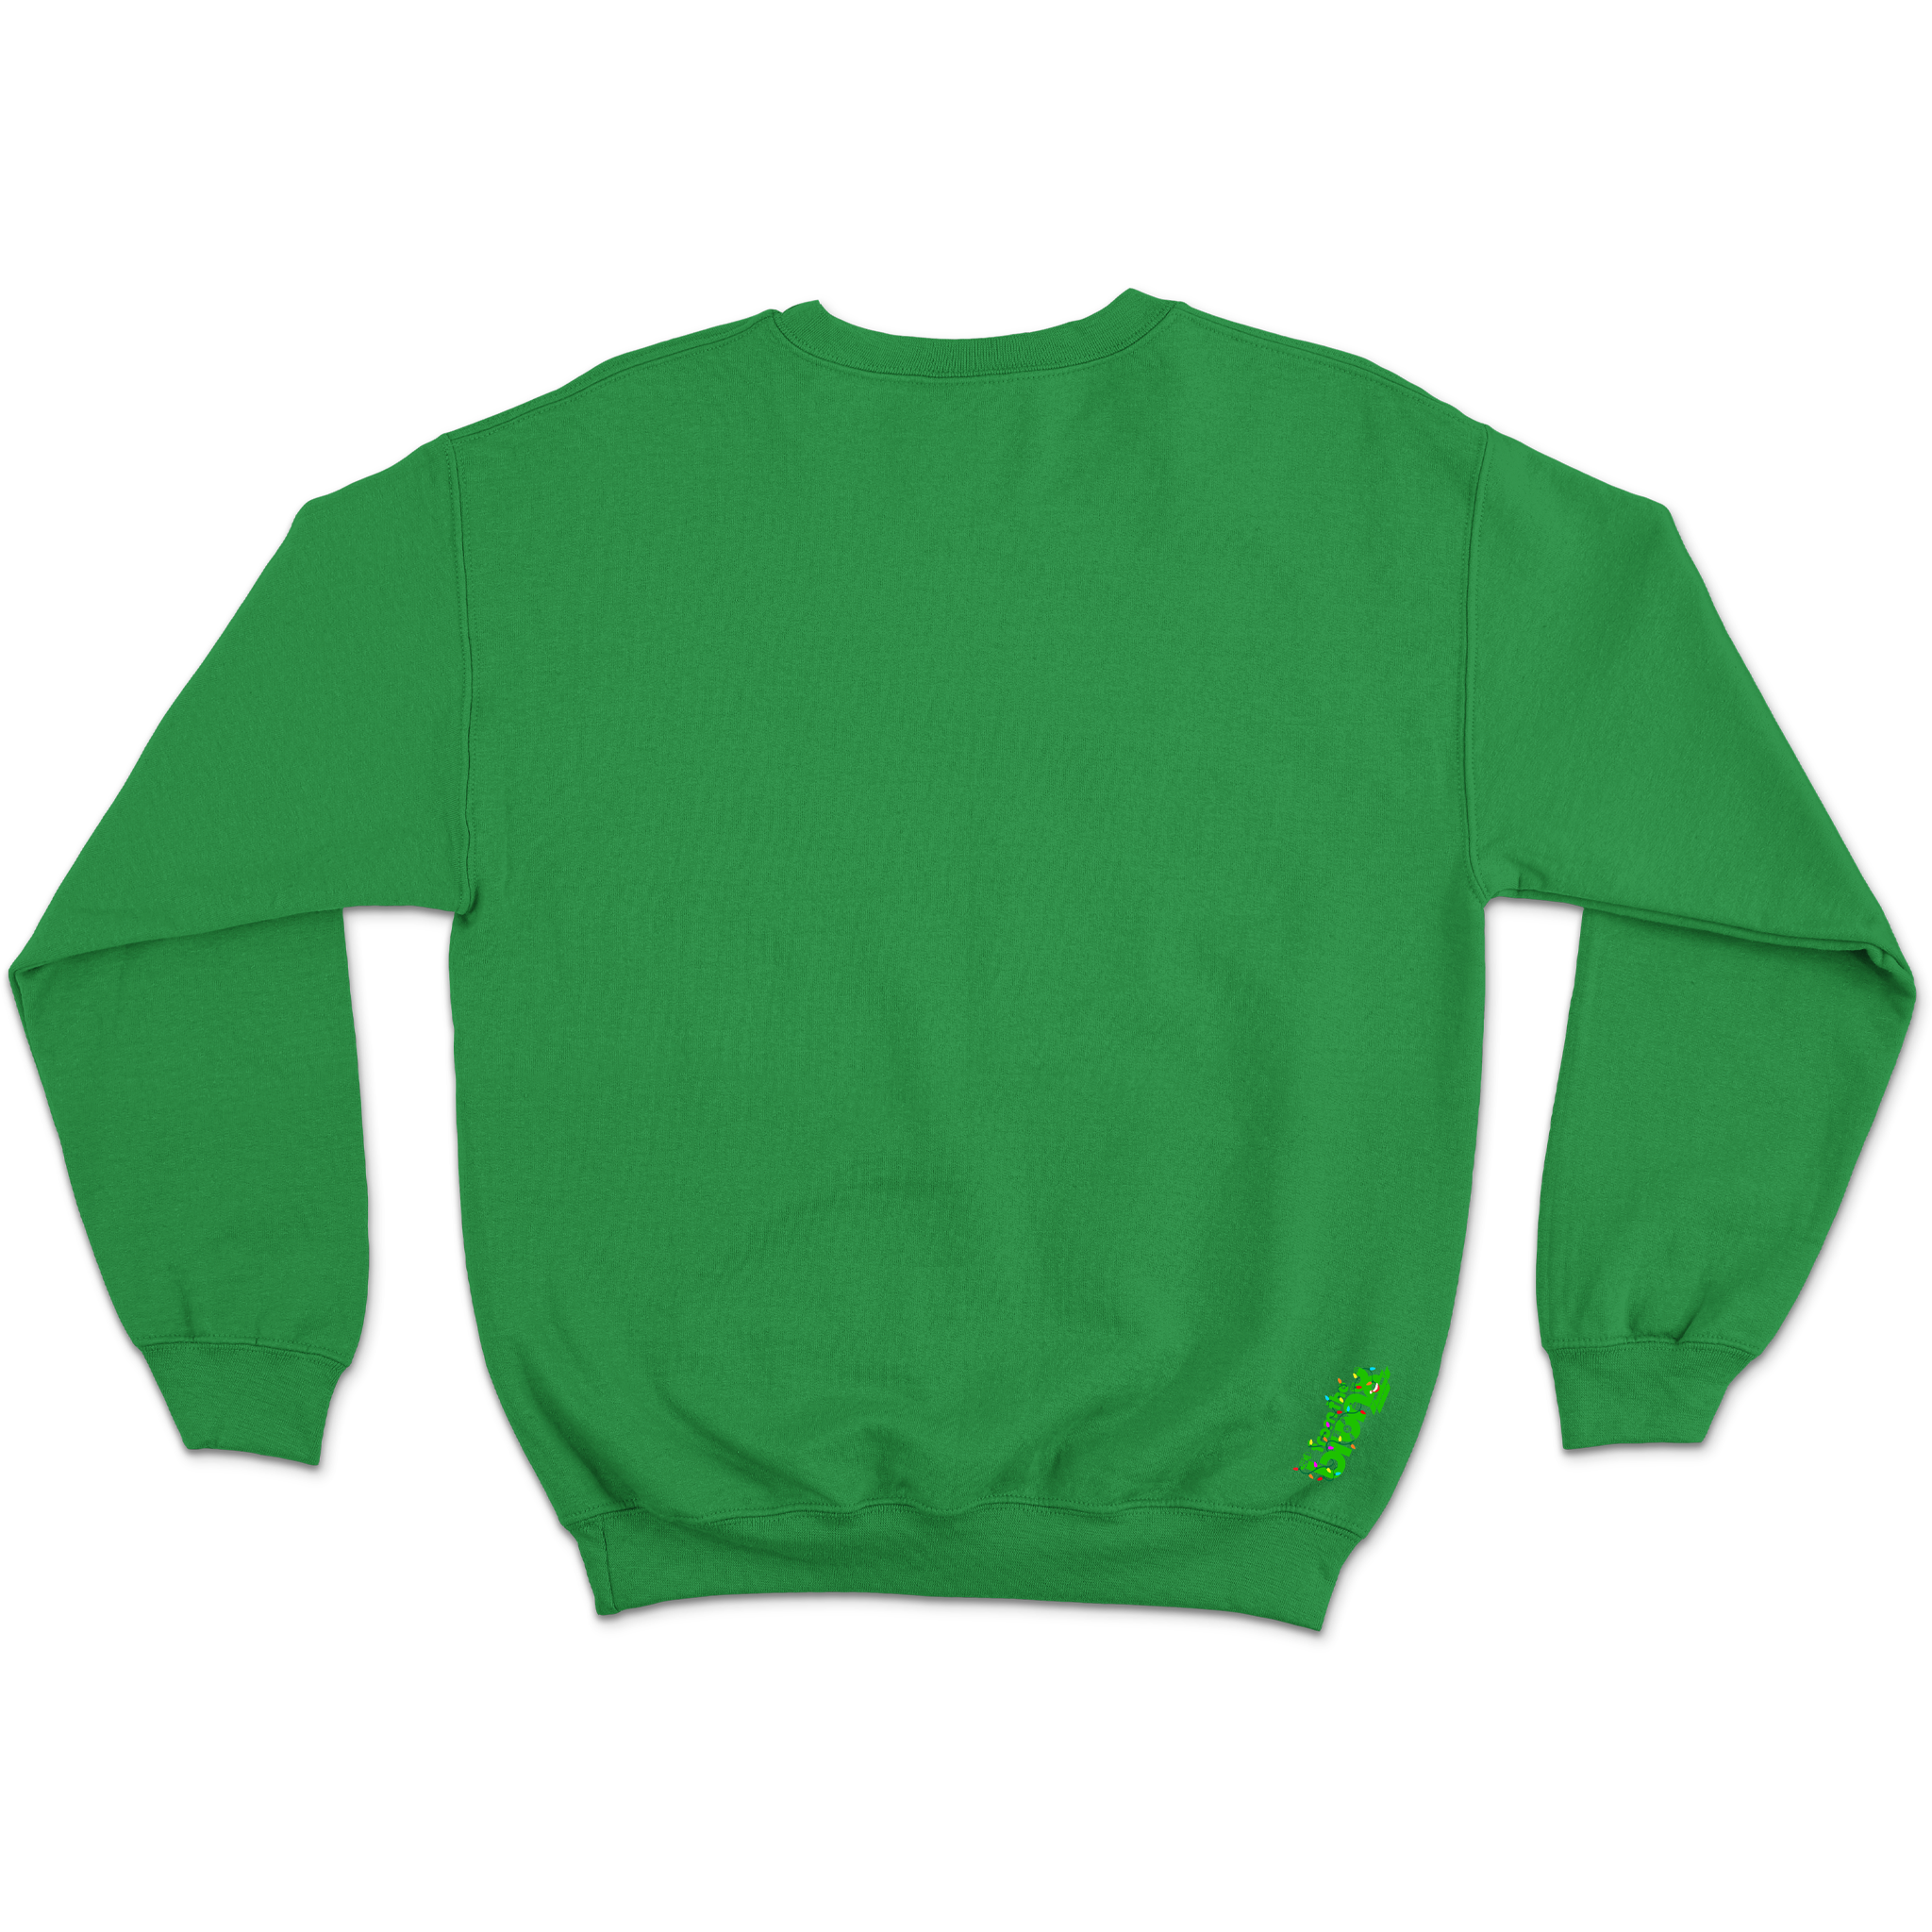 Merry BXmas Holiday Crewneck Back in Green